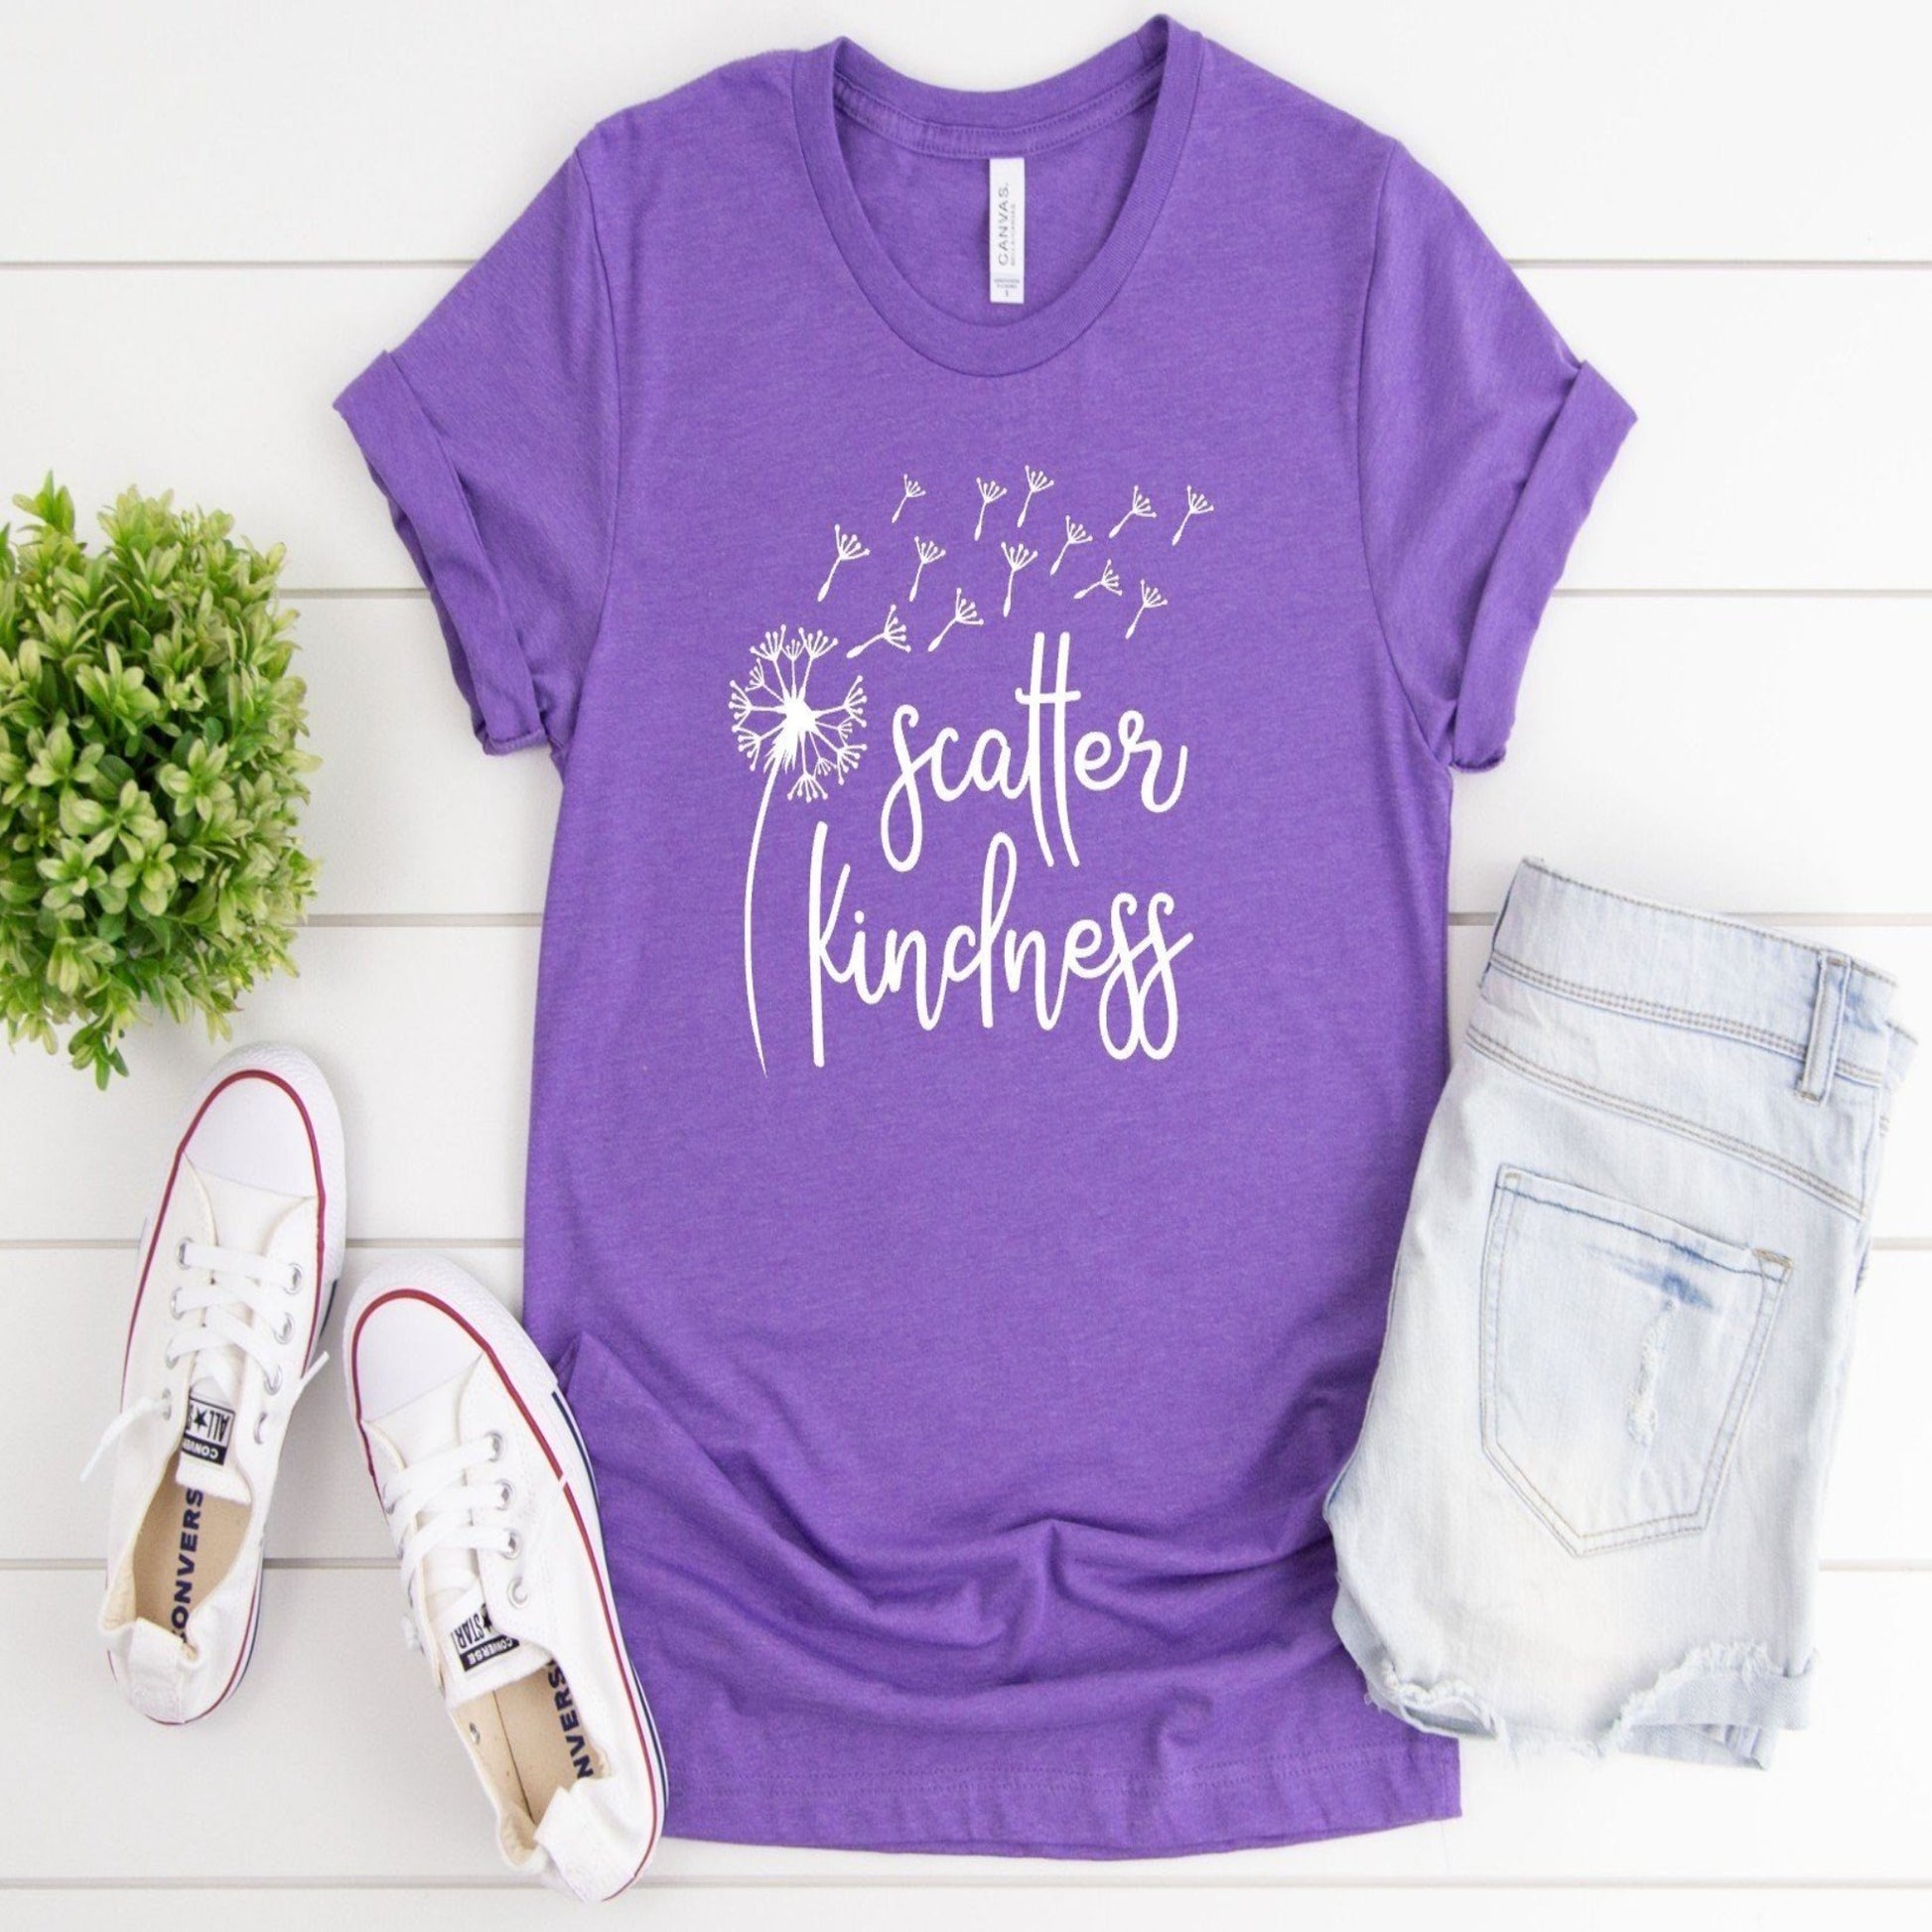 scatter_kindness specialty tee comfortable wear casual shirt  everyday tshirt